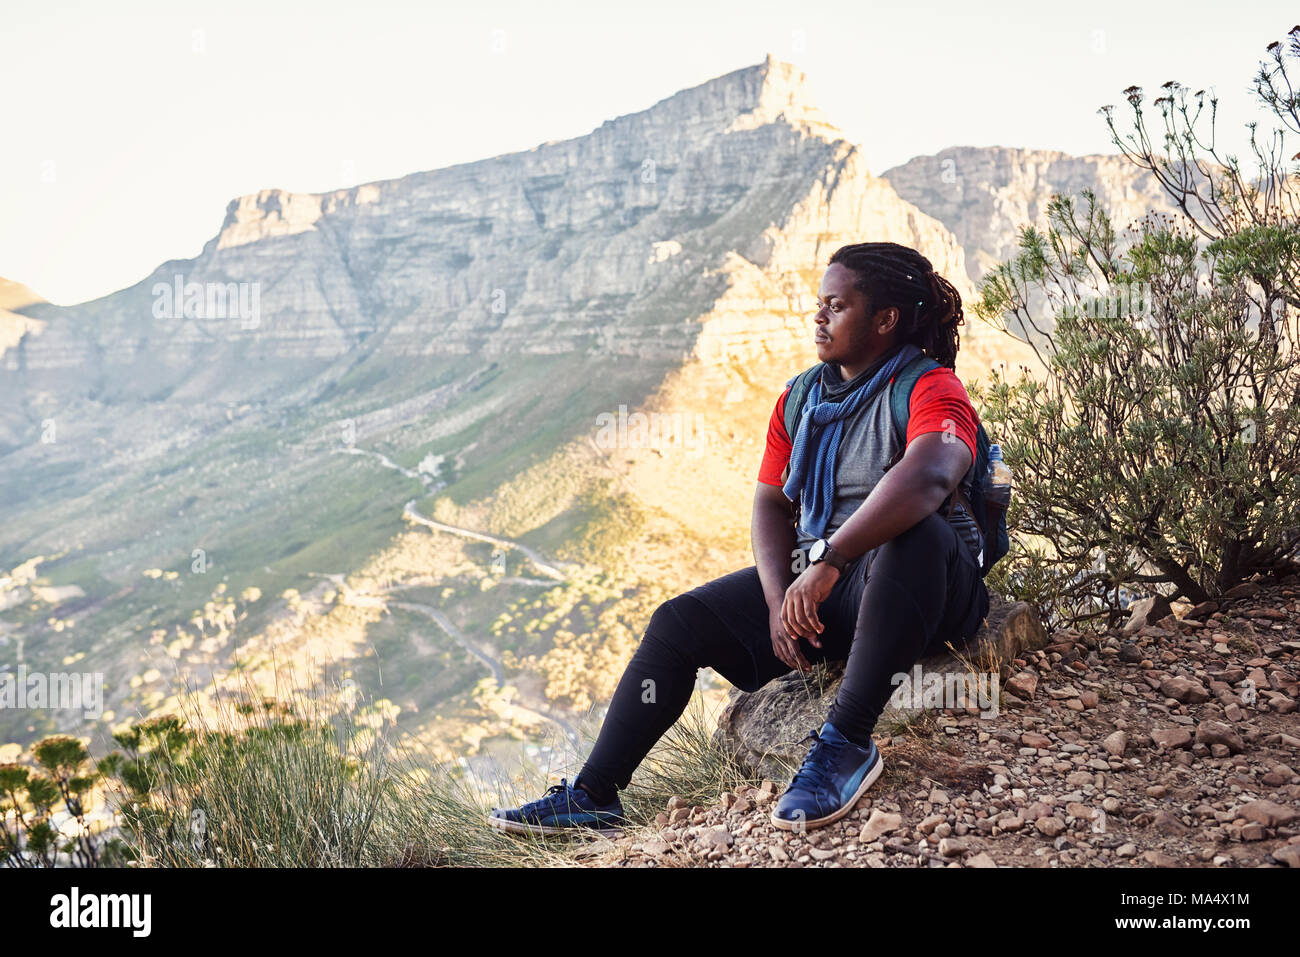 African hiker taking a break sitting next to the hiking trail on a mountainous trail to take in the amazing views of all the mountains around him that Stock Photo